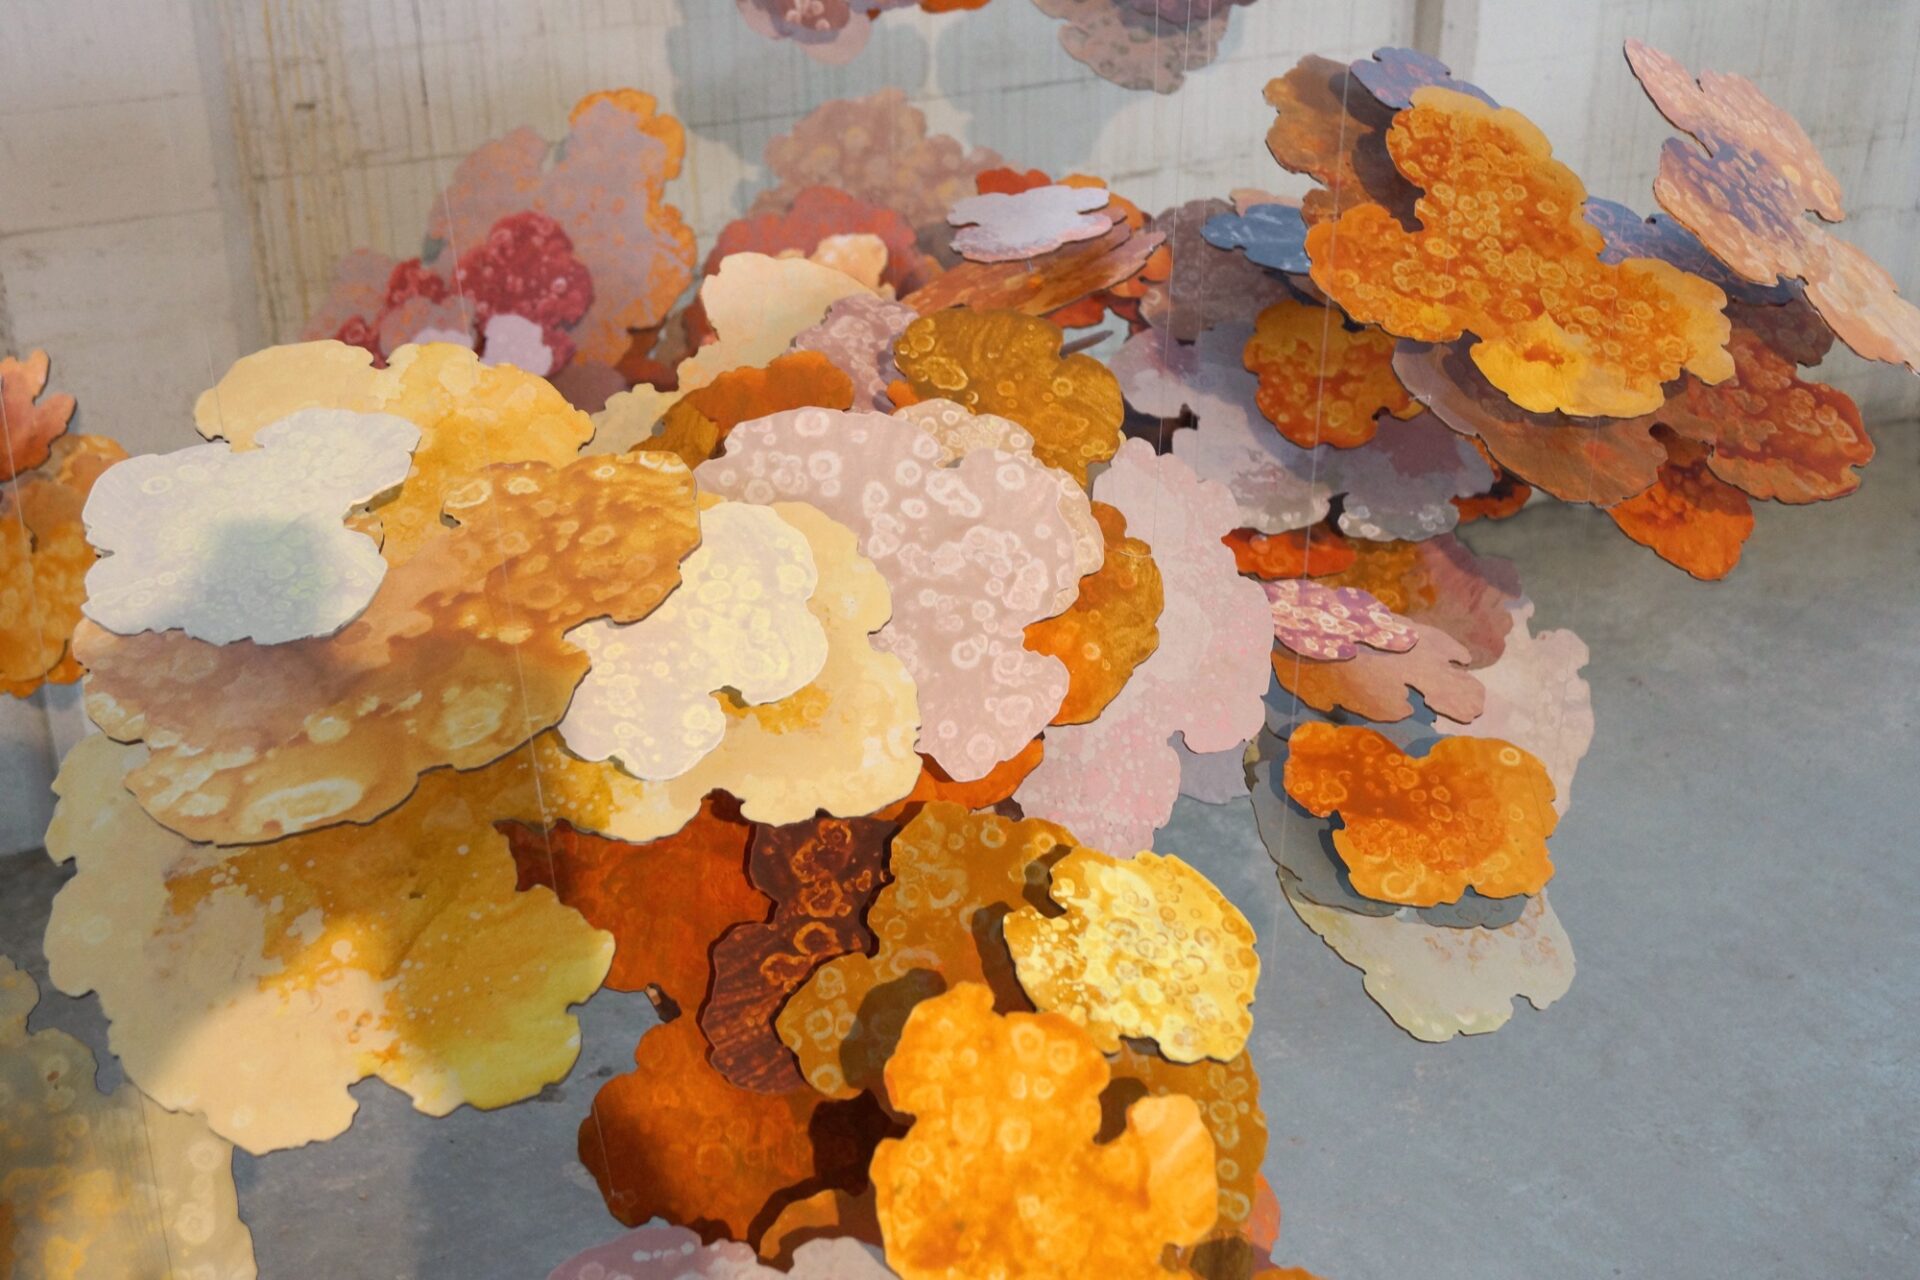 a detail of petal-like shapes painted with oranges, yellows, and pinks, part of a large sculpture consisting of many of the shapes suspended from the ceiling